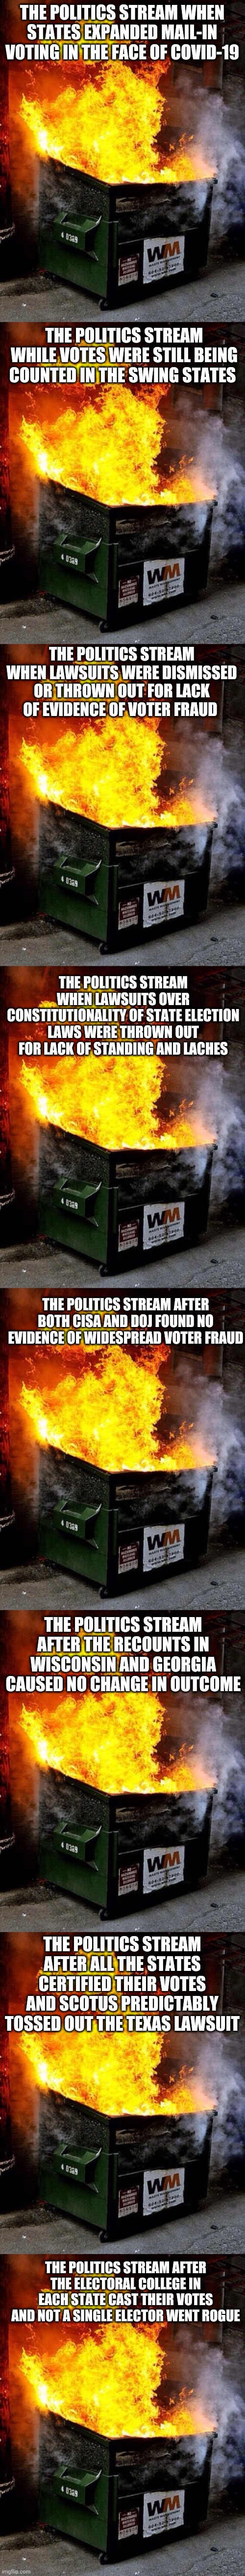 A long meme to go with the long last 2 months.  If this annoys the right, consider how annoying your memes are/have been. | THE POLITICS STREAM WHEN STATES EXPANDED MAIL-IN VOTING IN THE FACE OF COVID-19; THE POLITICS STREAM WHILE VOTES WERE STILL BEING COUNTED IN THE SWING STATES; THE POLITICS STREAM WHEN LAWSUITS WERE DISMISSED OR THROWN OUT FOR LACK OF EVIDENCE OF VOTER FRAUD; THE POLITICS STREAM WHEN LAWSUITS OVER CONSTITUTIONALITY OF STATE ELECTION LAWS WERE THROWN OUT FOR LACK OF STANDING AND LACHES; THE POLITICS STREAM AFTER BOTH CISA AND DOJ FOUND NO EVIDENCE OF WIDESPREAD VOTER FRAUD; THE POLITICS STREAM AFTER THE RECOUNTS IN WISCONSIN AND GEORGIA CAUSED NO CHANGE IN OUTCOME; THE POLITICS STREAM AFTER ALL THE STATES CERTIFIED THEIR VOTES AND SCOTUS PREDICTABLY TOSSED OUT THE TEXAS LAWSUIT; THE POLITICS STREAM AFTER THE ELECTORAL COLLEGE IN EACH STATE CAST THEIR VOTES AND NOT A SINGLE ELECTOR WENT ROGUE | image tagged in dumpster fire,election,voter fraud | made w/ Imgflip meme maker